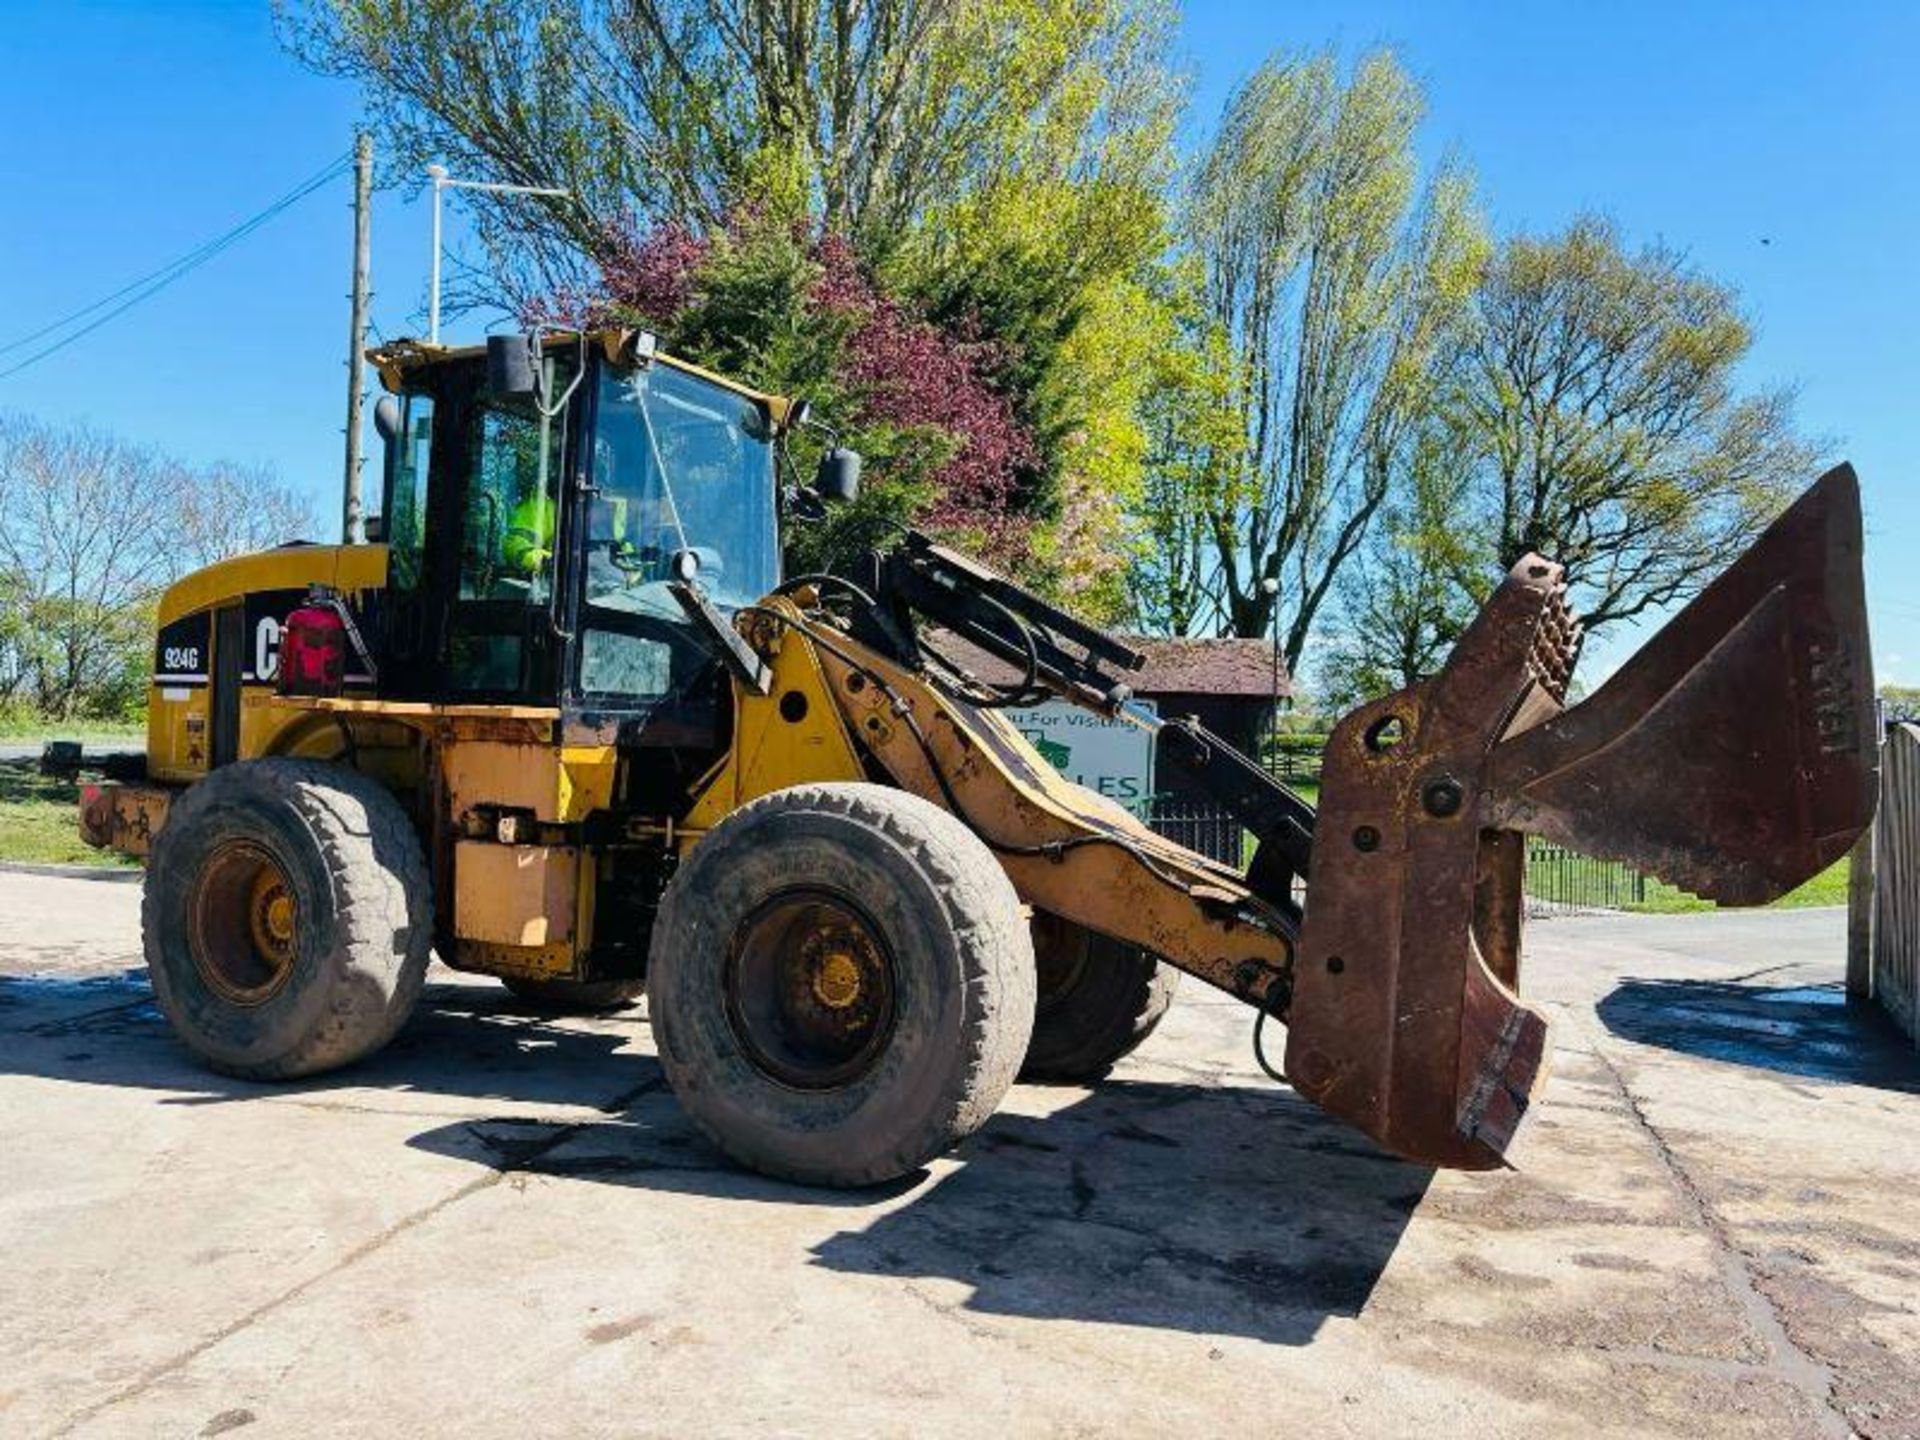 CATERPILLAR 924G 4WD LOADING SHOVEL C/W FOUR IN ONE BUCKET - Image 8 of 18